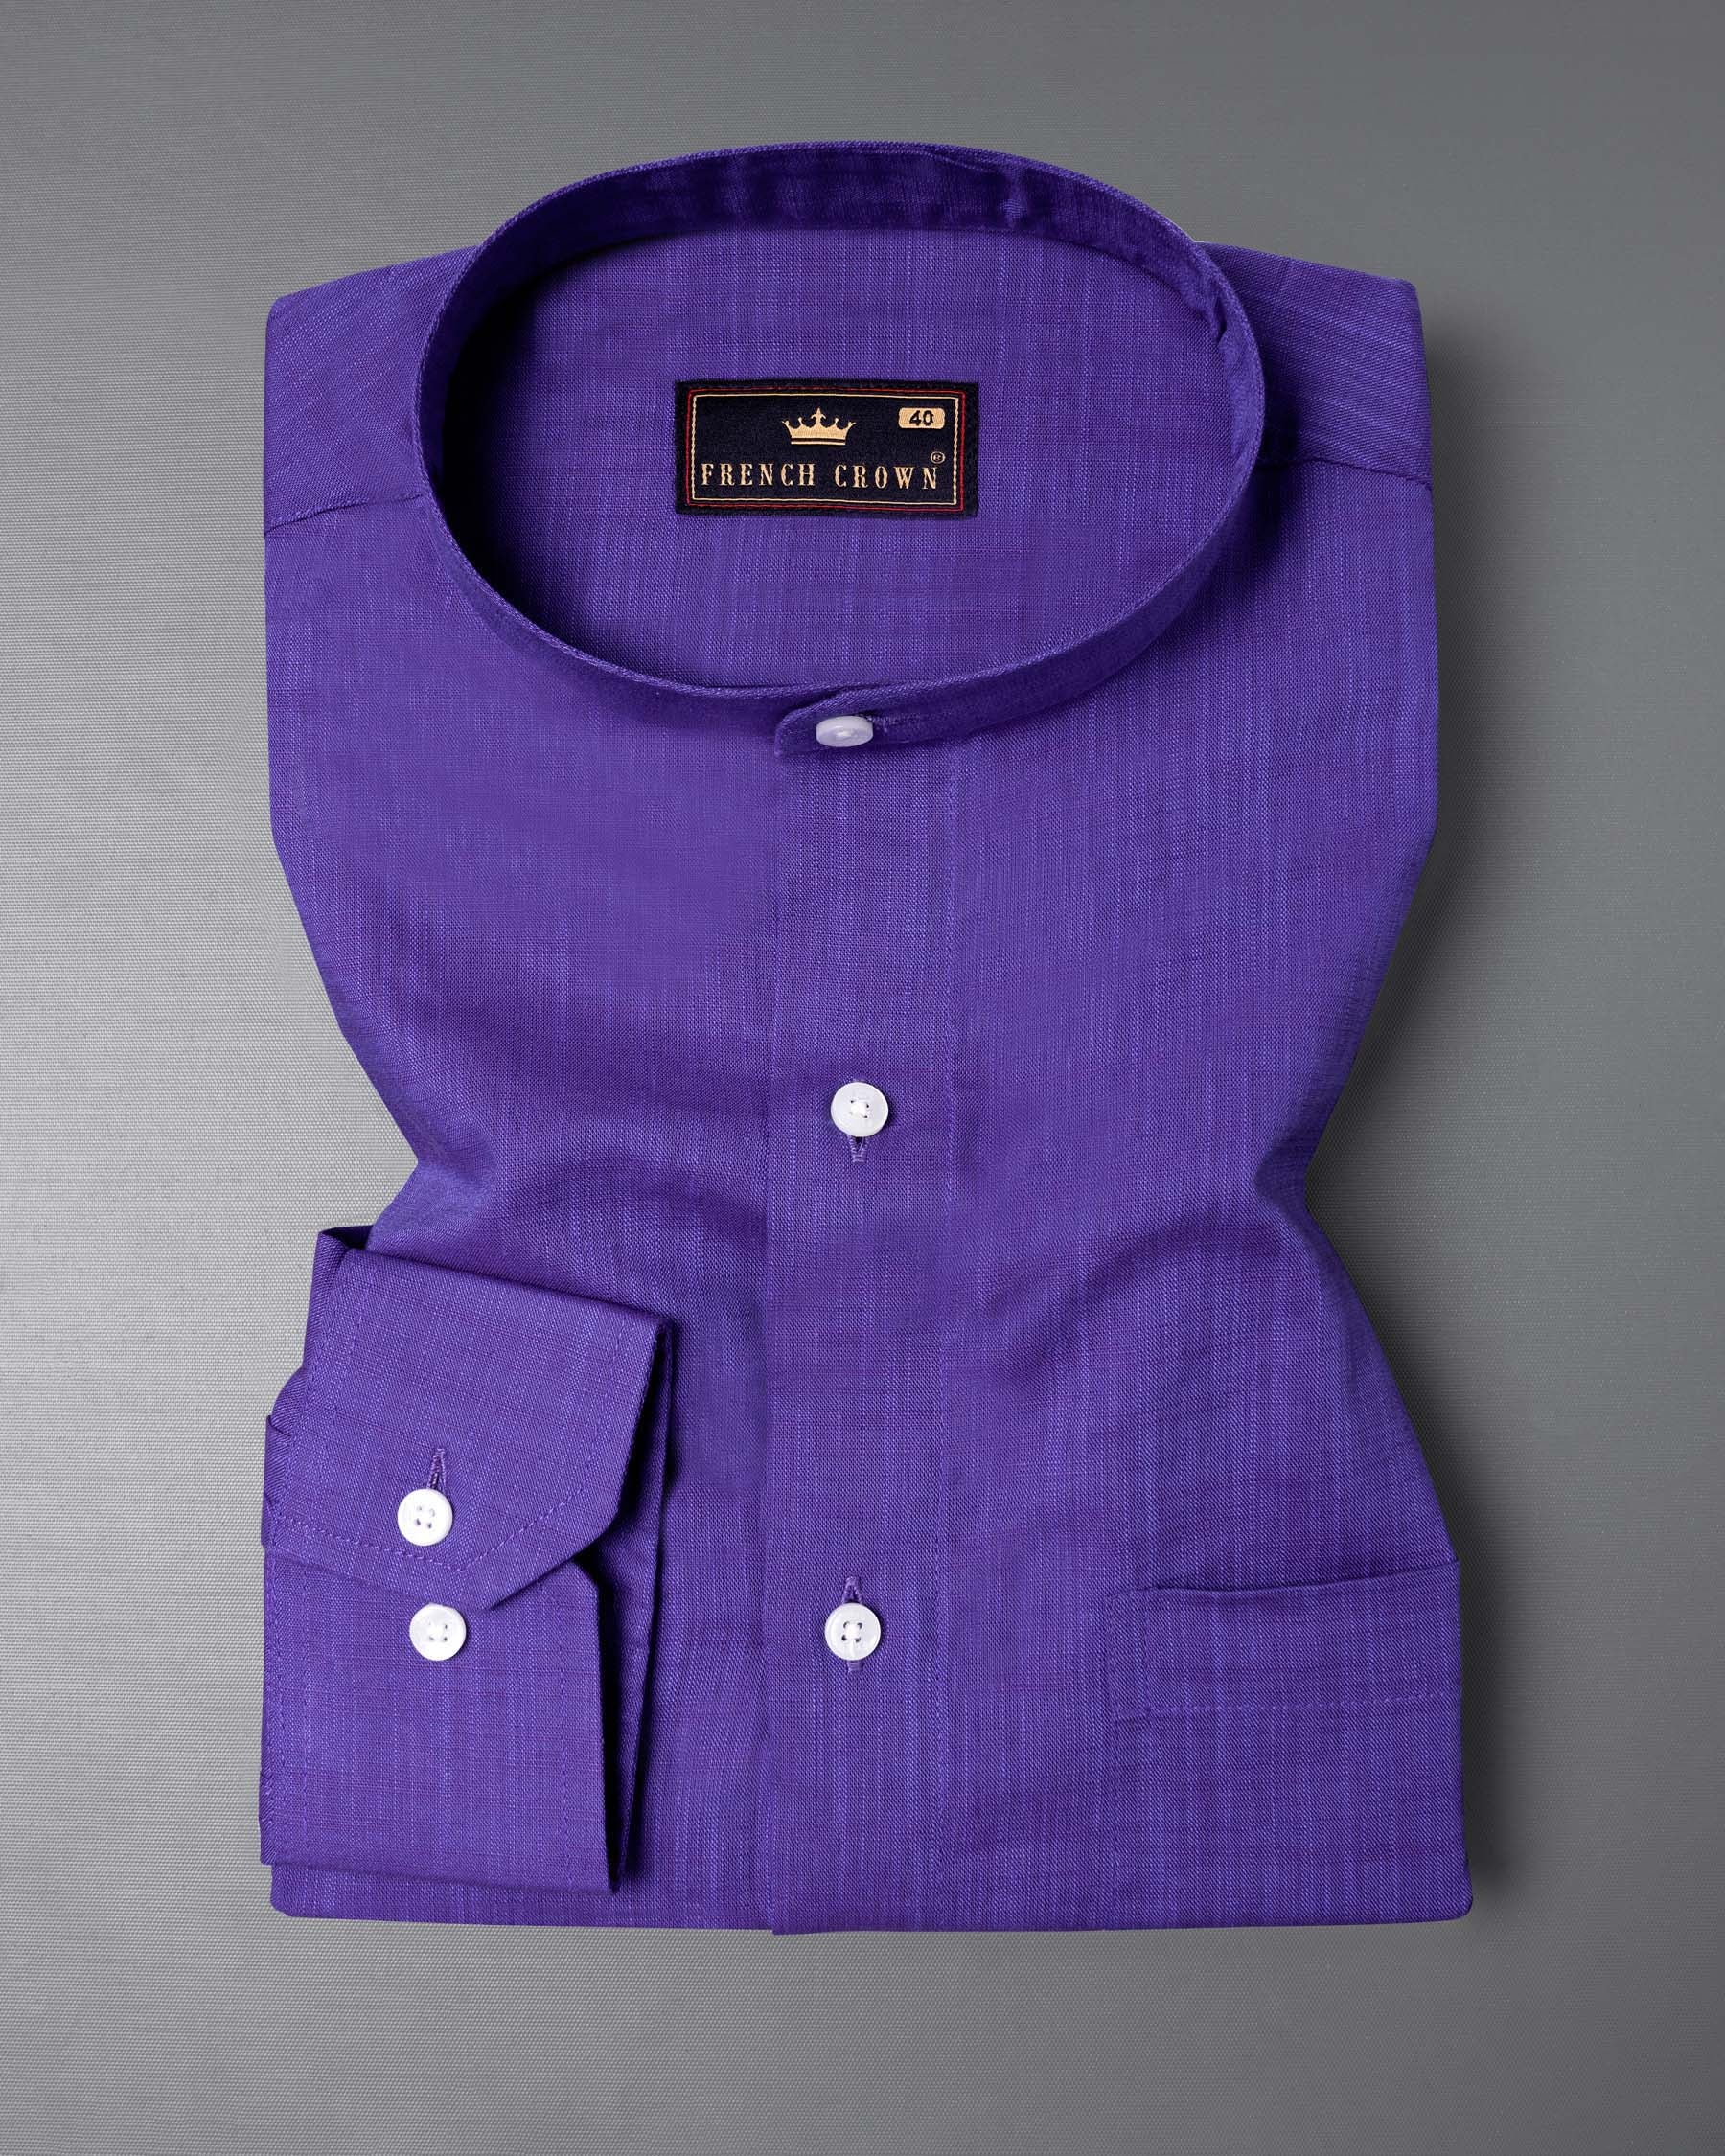 Gigas Blue with Purple Two tone Chambray Premium Cotton Shirt 5878-M-38, 5878-M-H-38, 5878-M-39, 5878-M-H-39, 5878-M-40, 5878-M-H-40, 5878-M-42, 5878-M-H-42, 5878-M-44, 5878-M-H-44, 5878-M-46, 5878-M-H-46, 5878-M-48, 5878-M-H-48, 5878-M-50, 5878-M-H-50, 5878-M-52, 5878-M-H-52